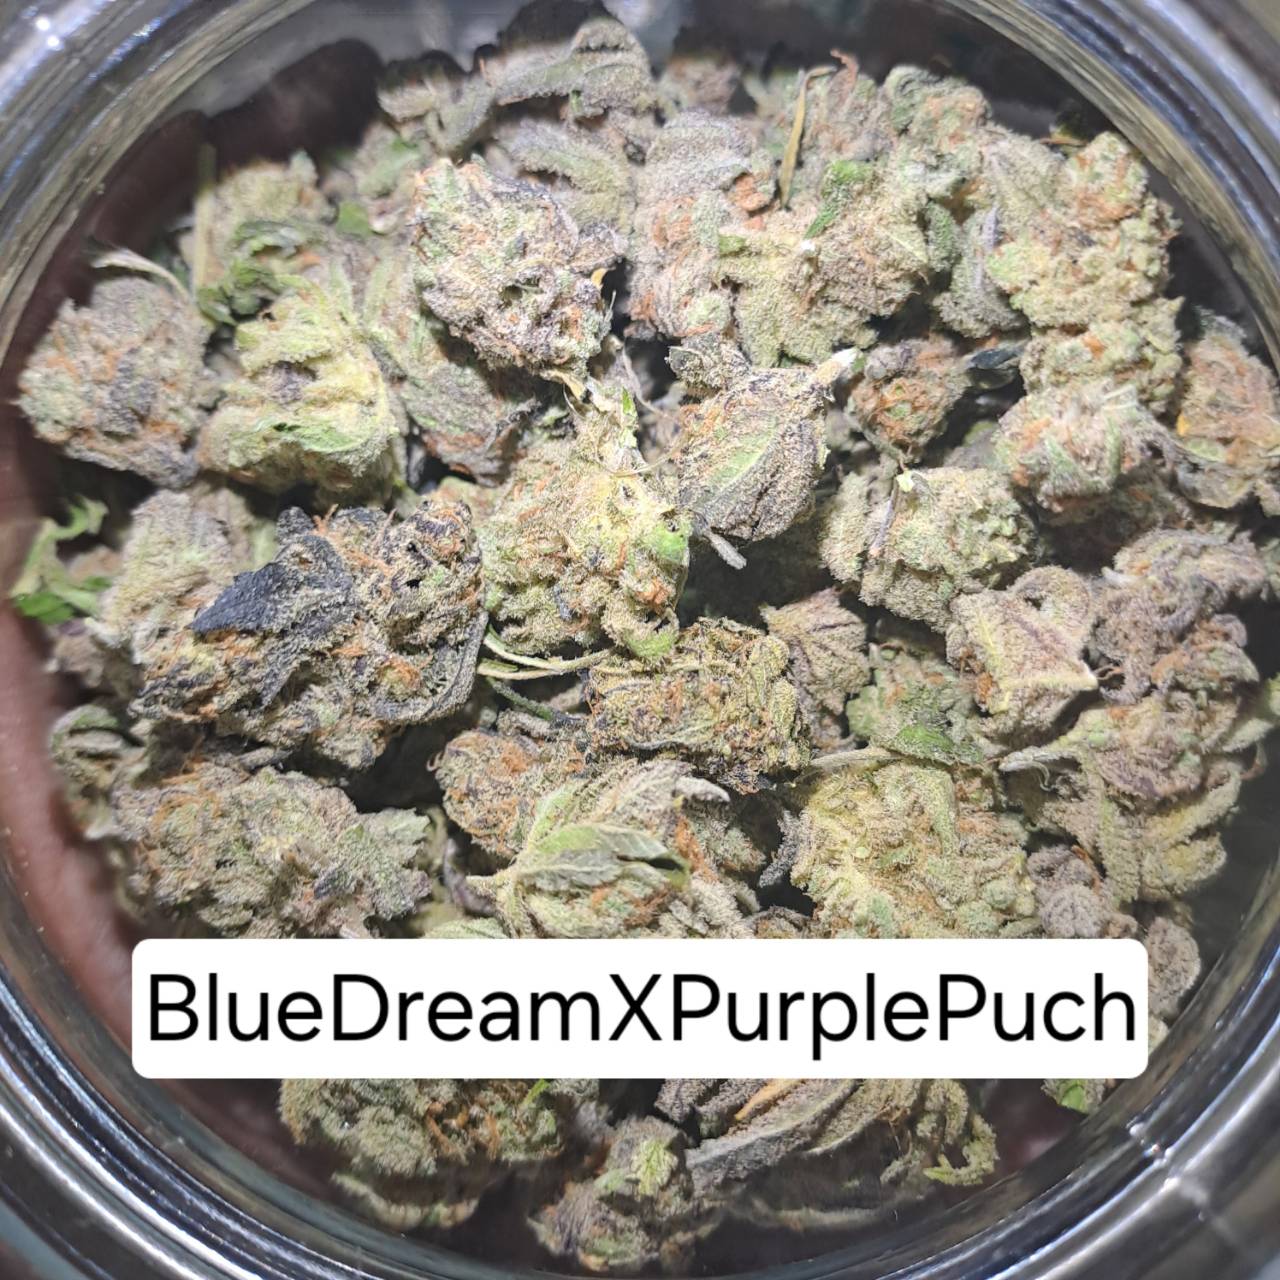 Product Image for Bluedream × PurplePunch